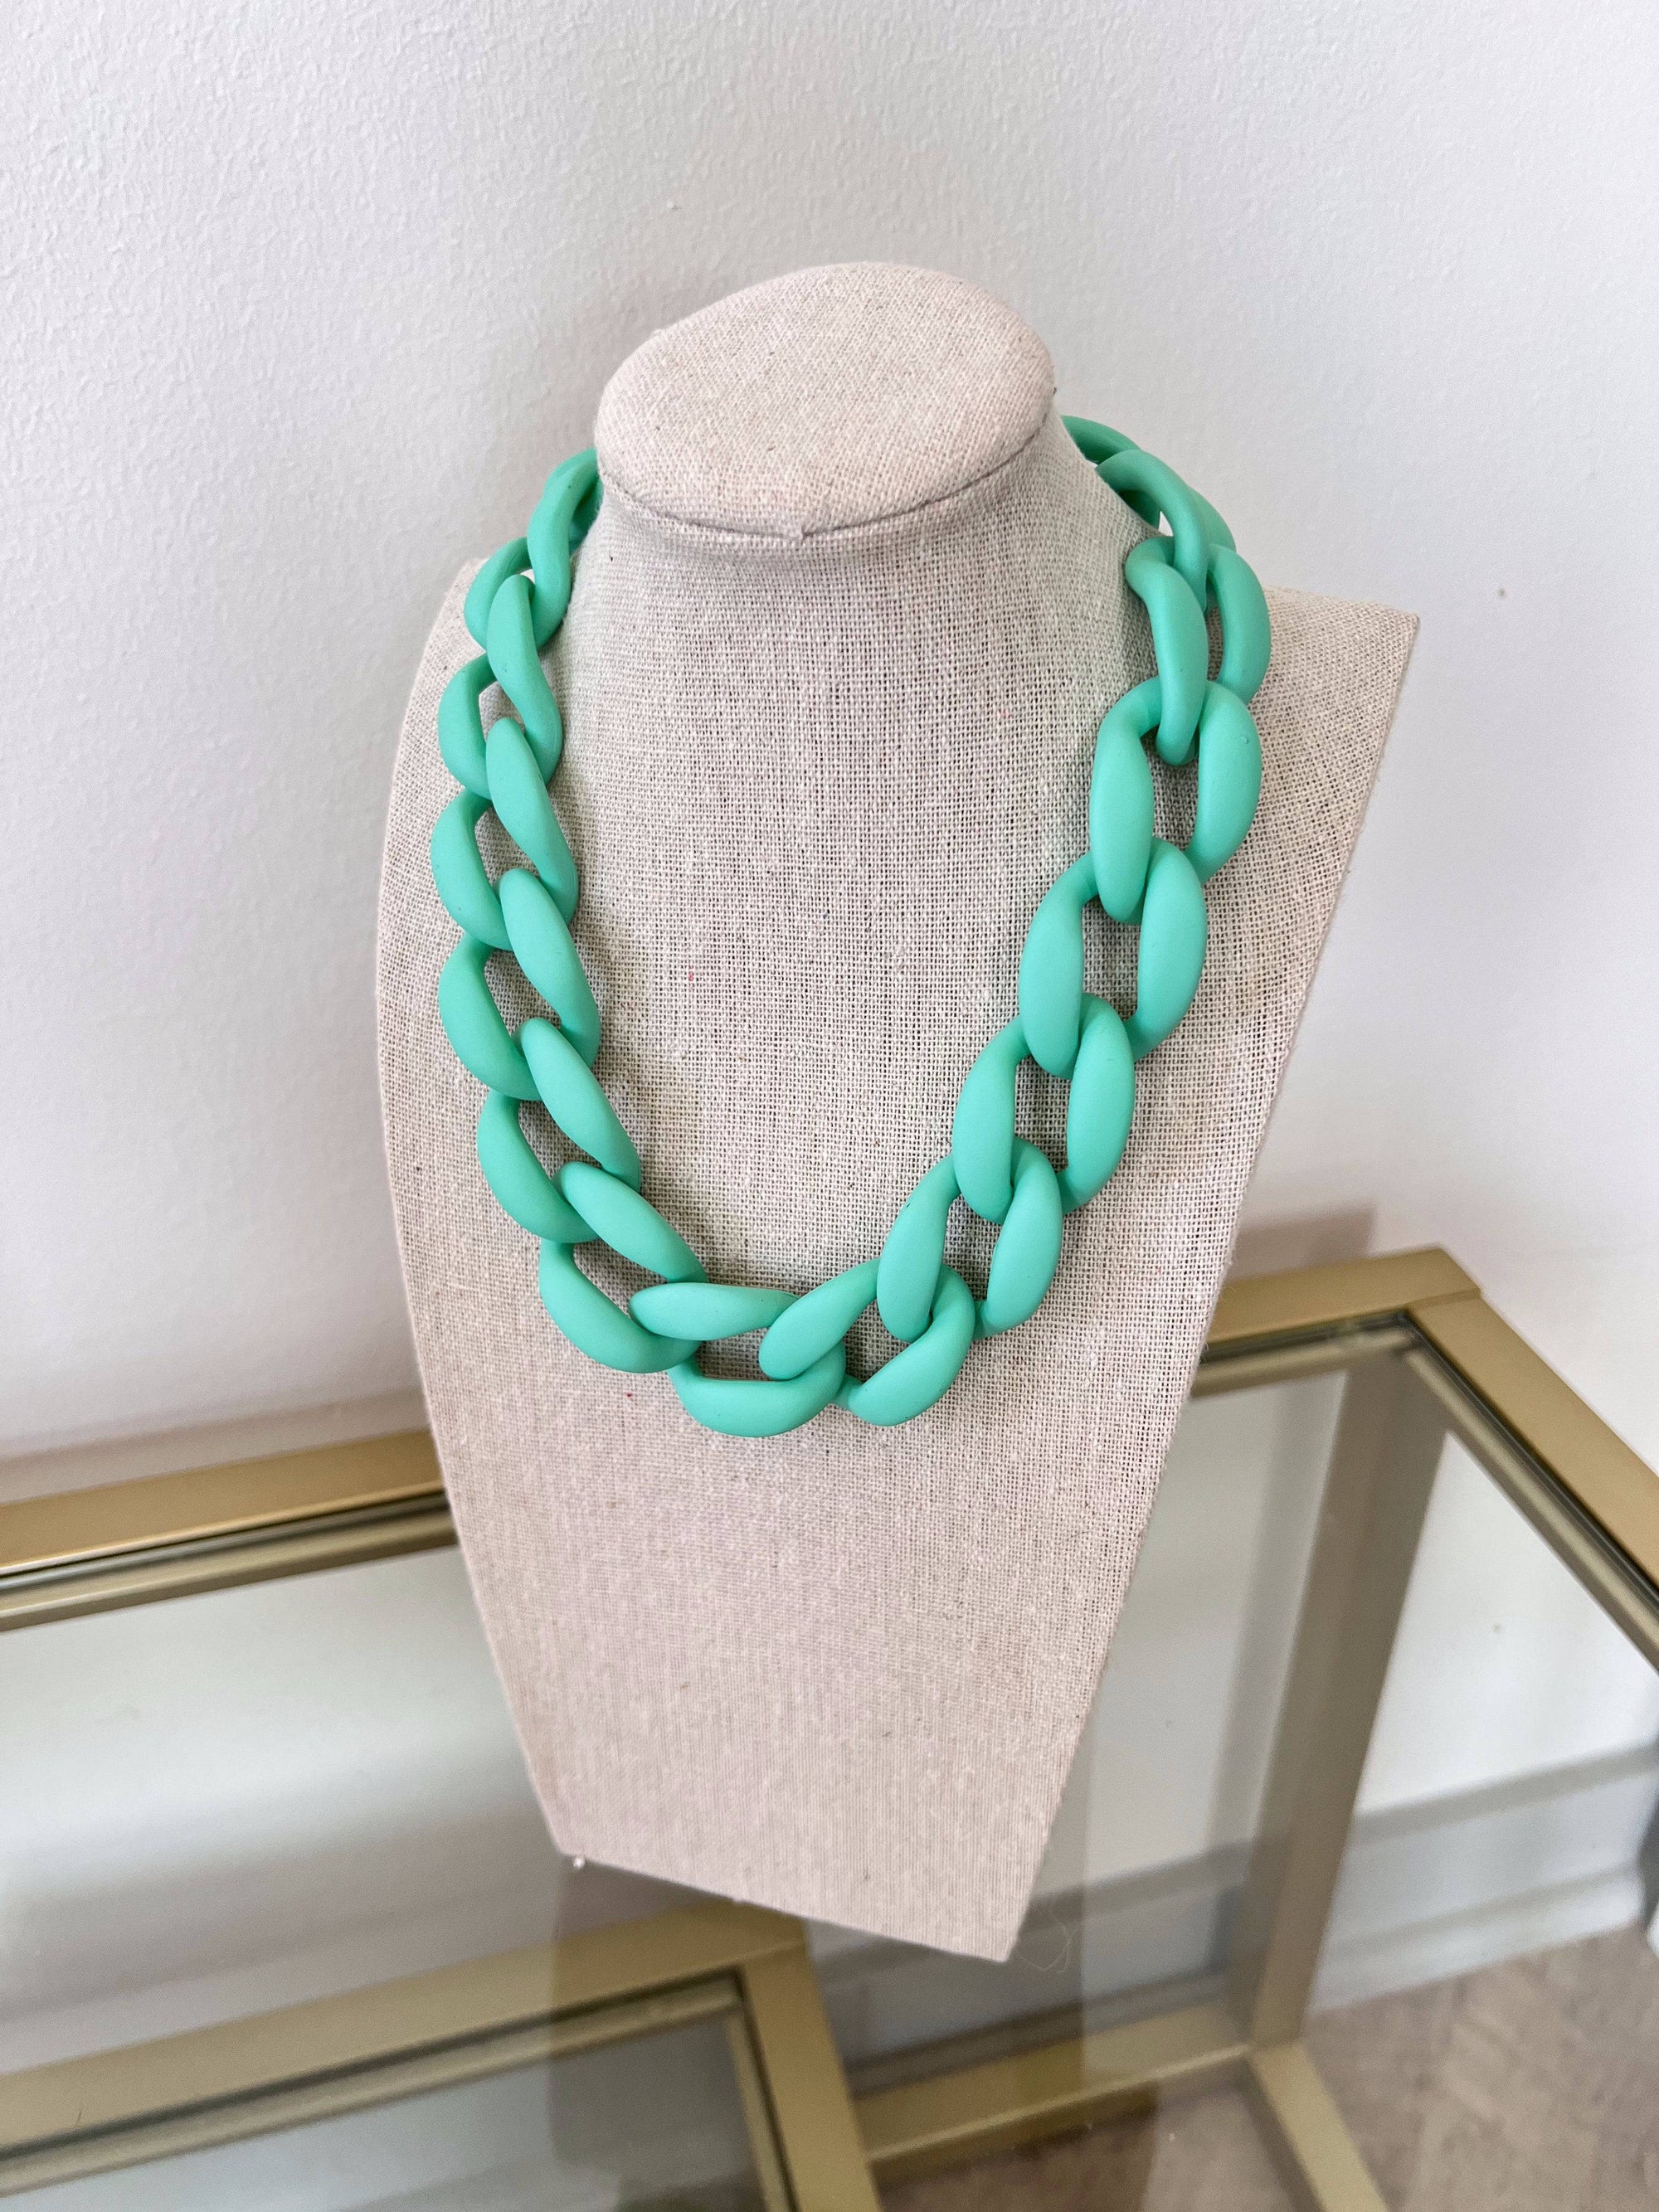 Acrylic Chain Necklace - Turquoise - The Preppy Bunny